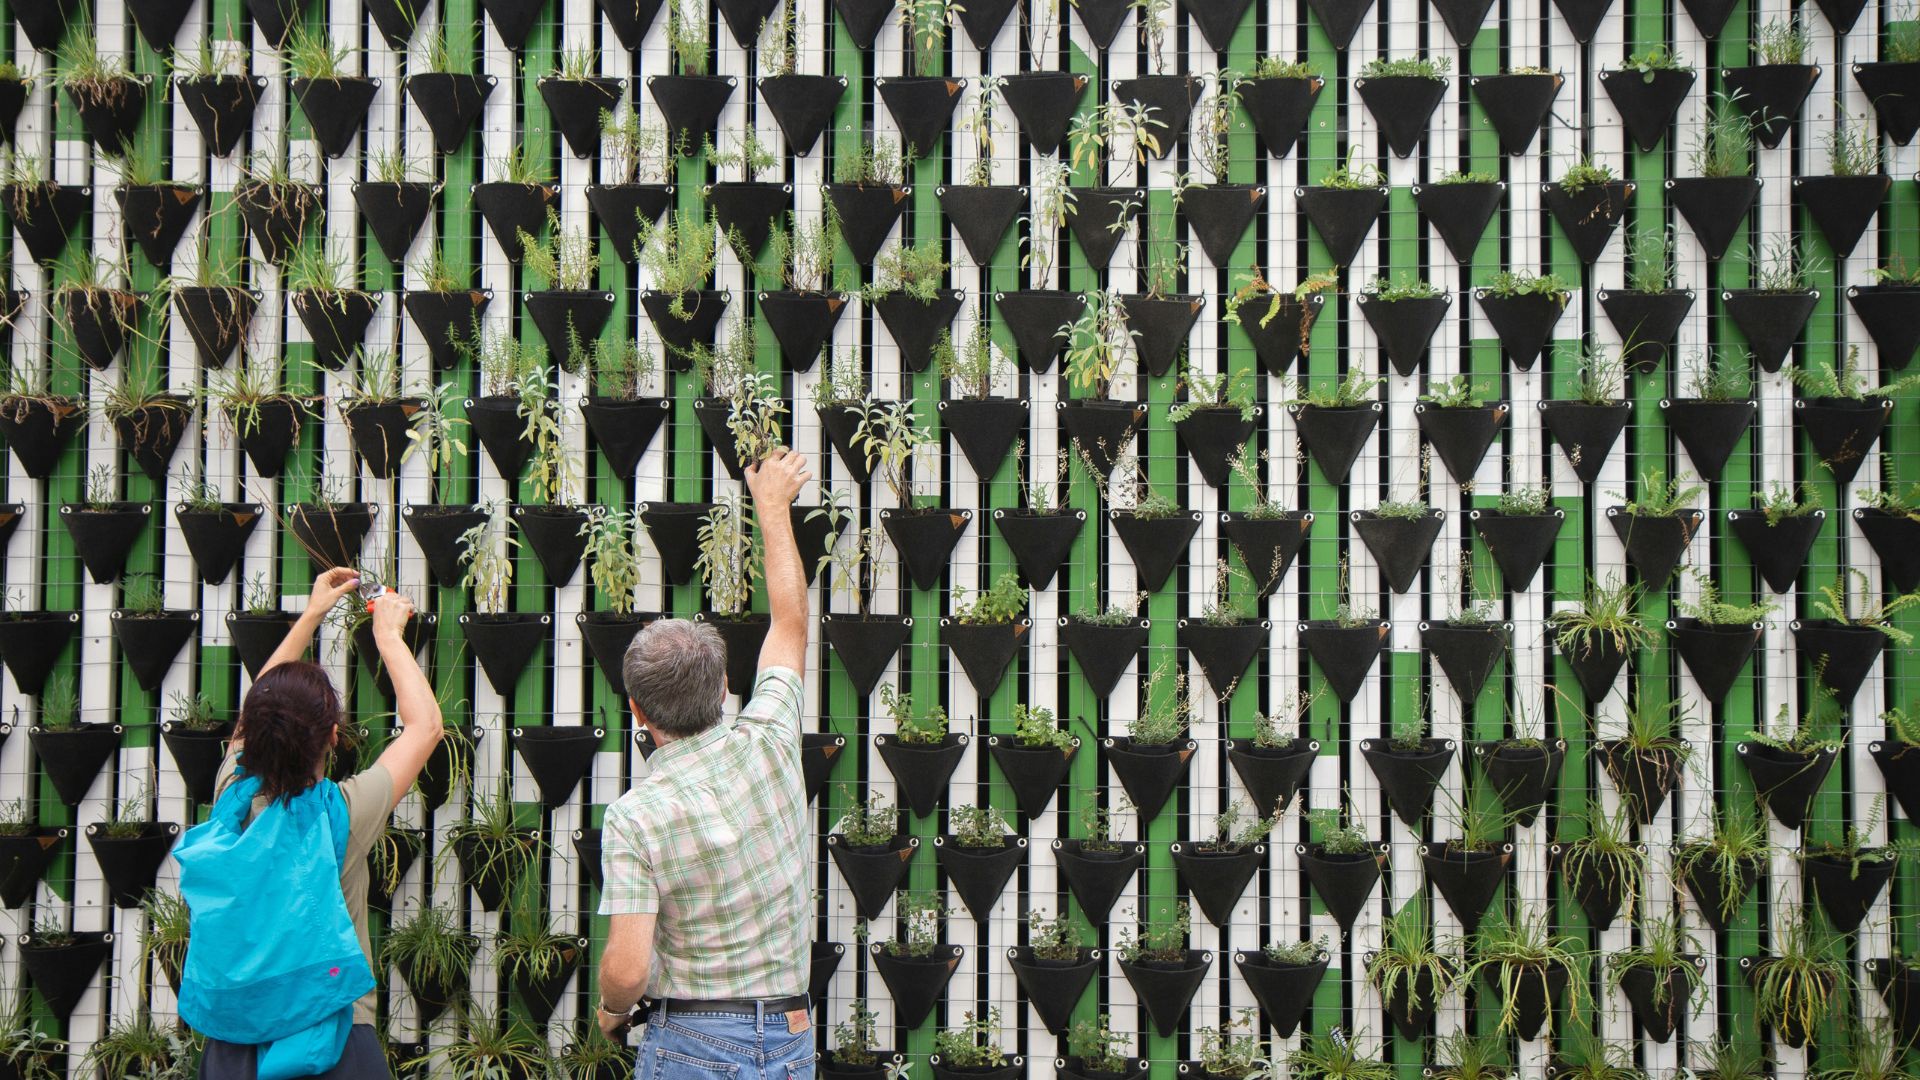 Vertical Gardens: Breathing New Life into Urban Spaces